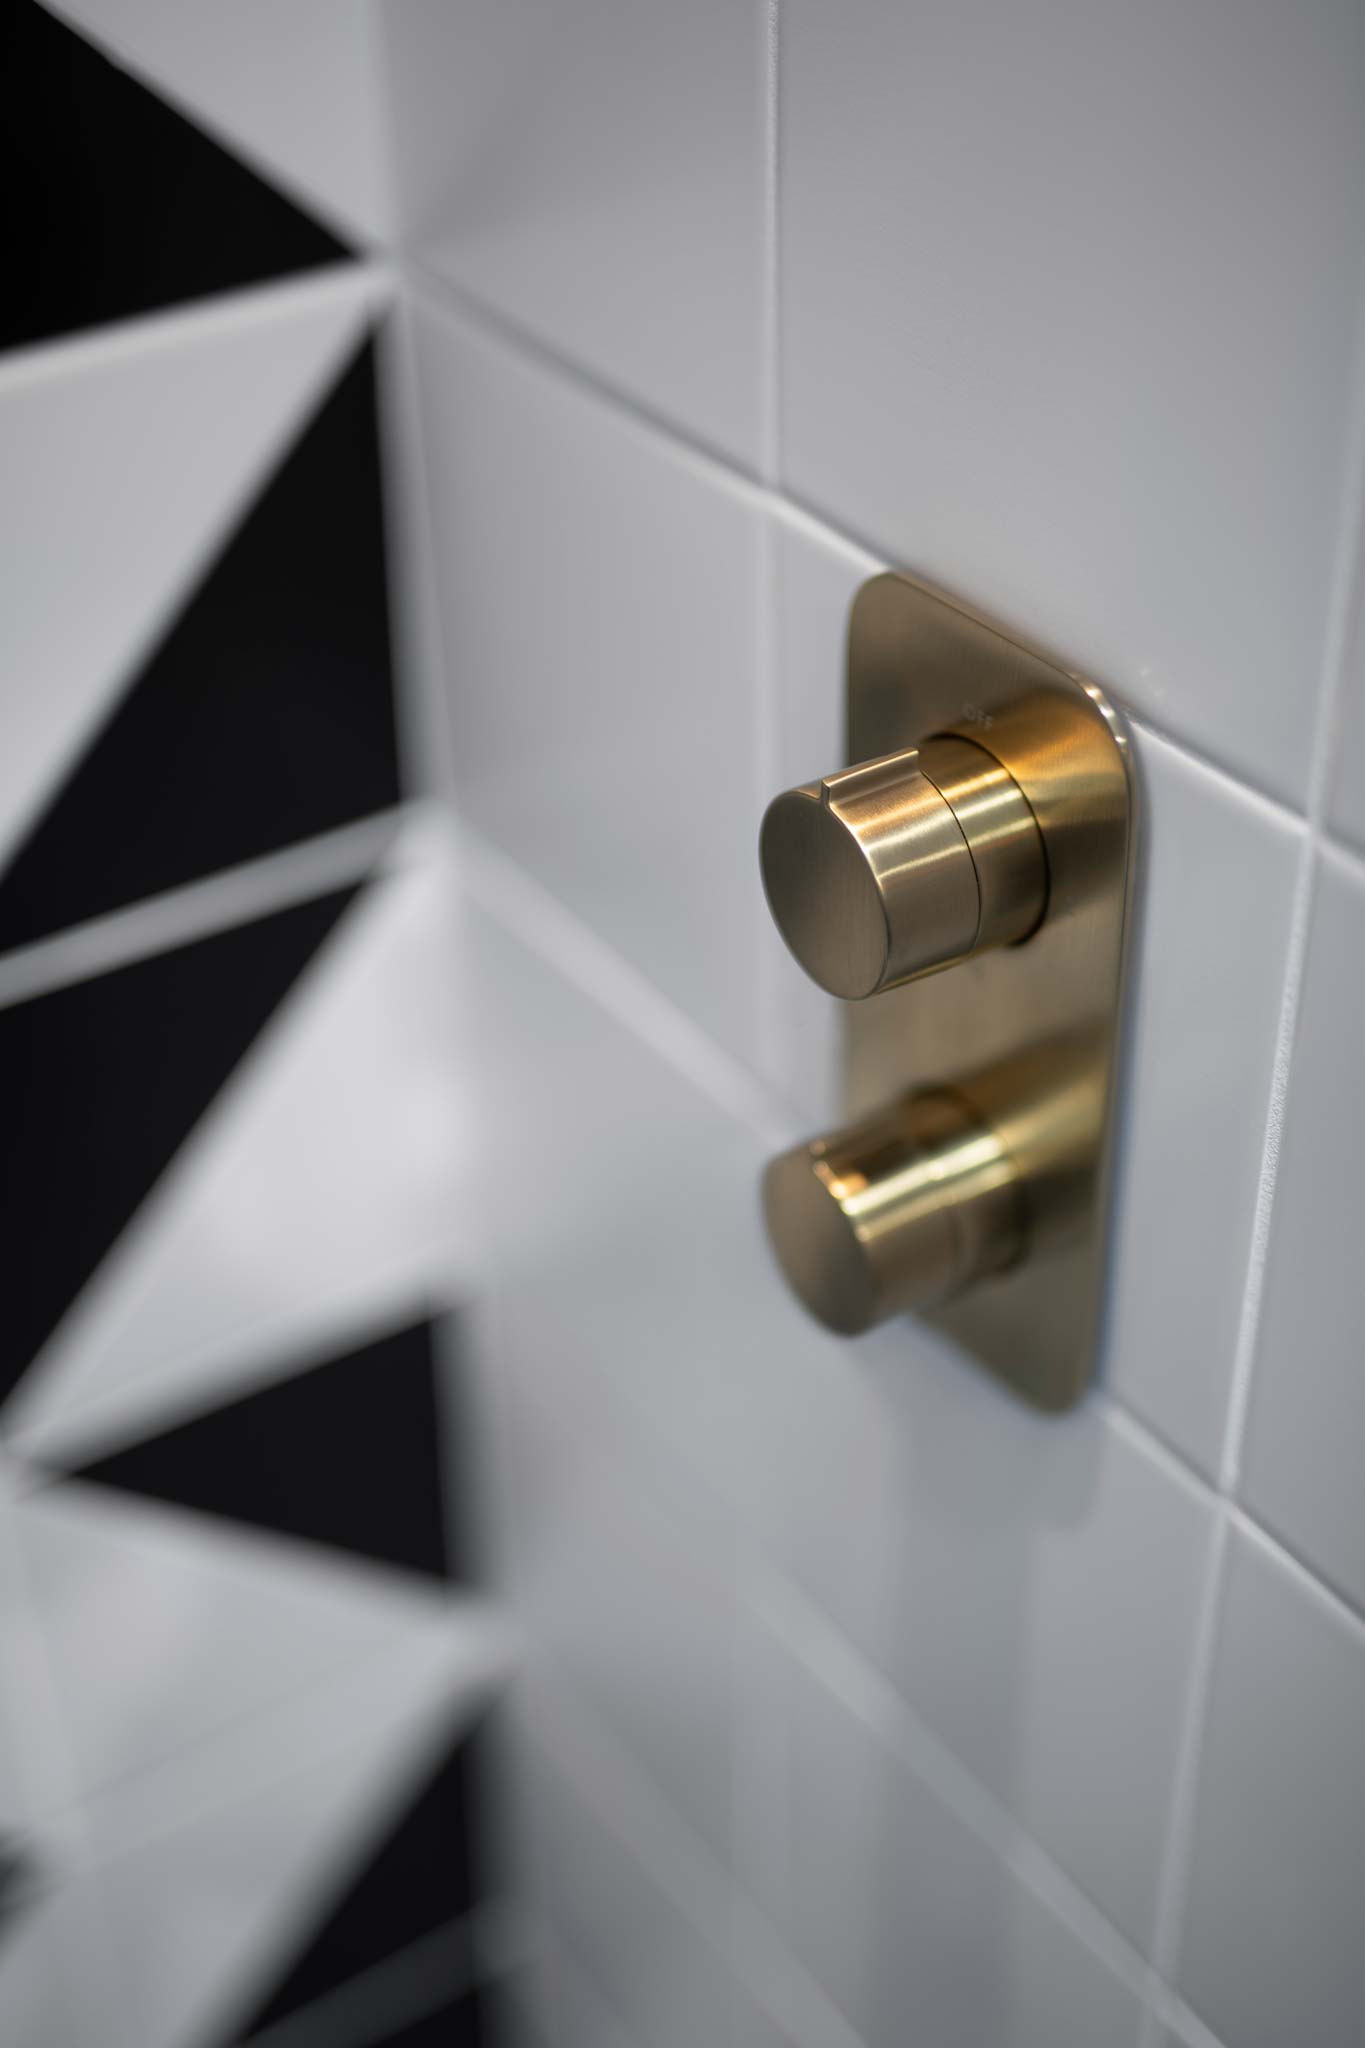 Location photography using a shallow depth-of-field of bathroom brassware, shower display